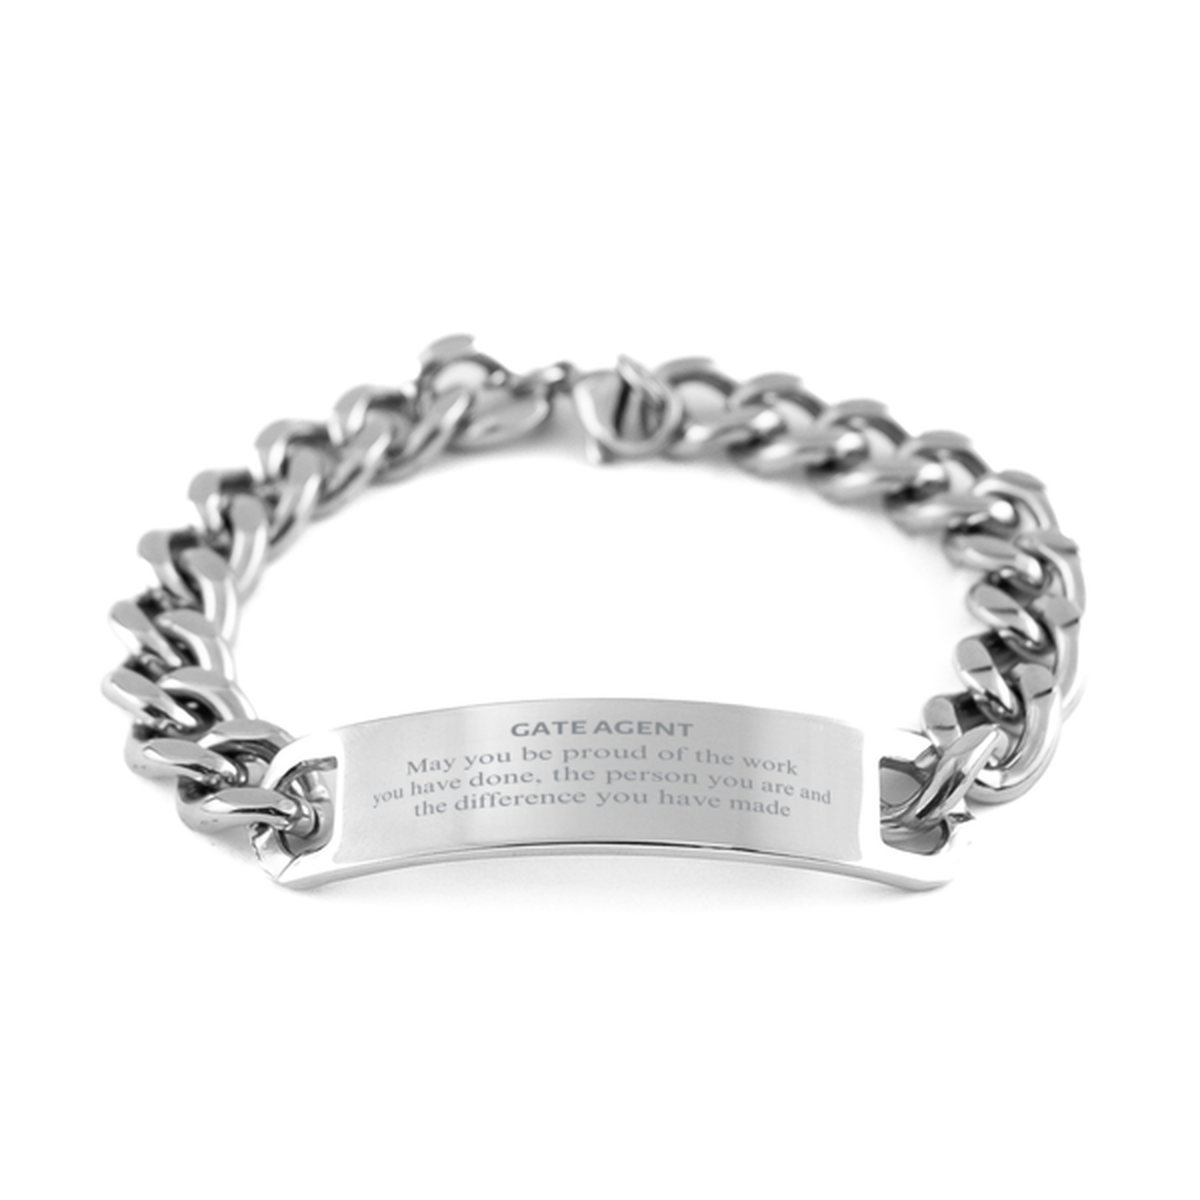 Gate Agent May you be proud of the work you have done, Retirement Gate Agent Cuban Chain Stainless Steel Bracelet for Colleague Appreciation Gifts Amazing for Gate Agent